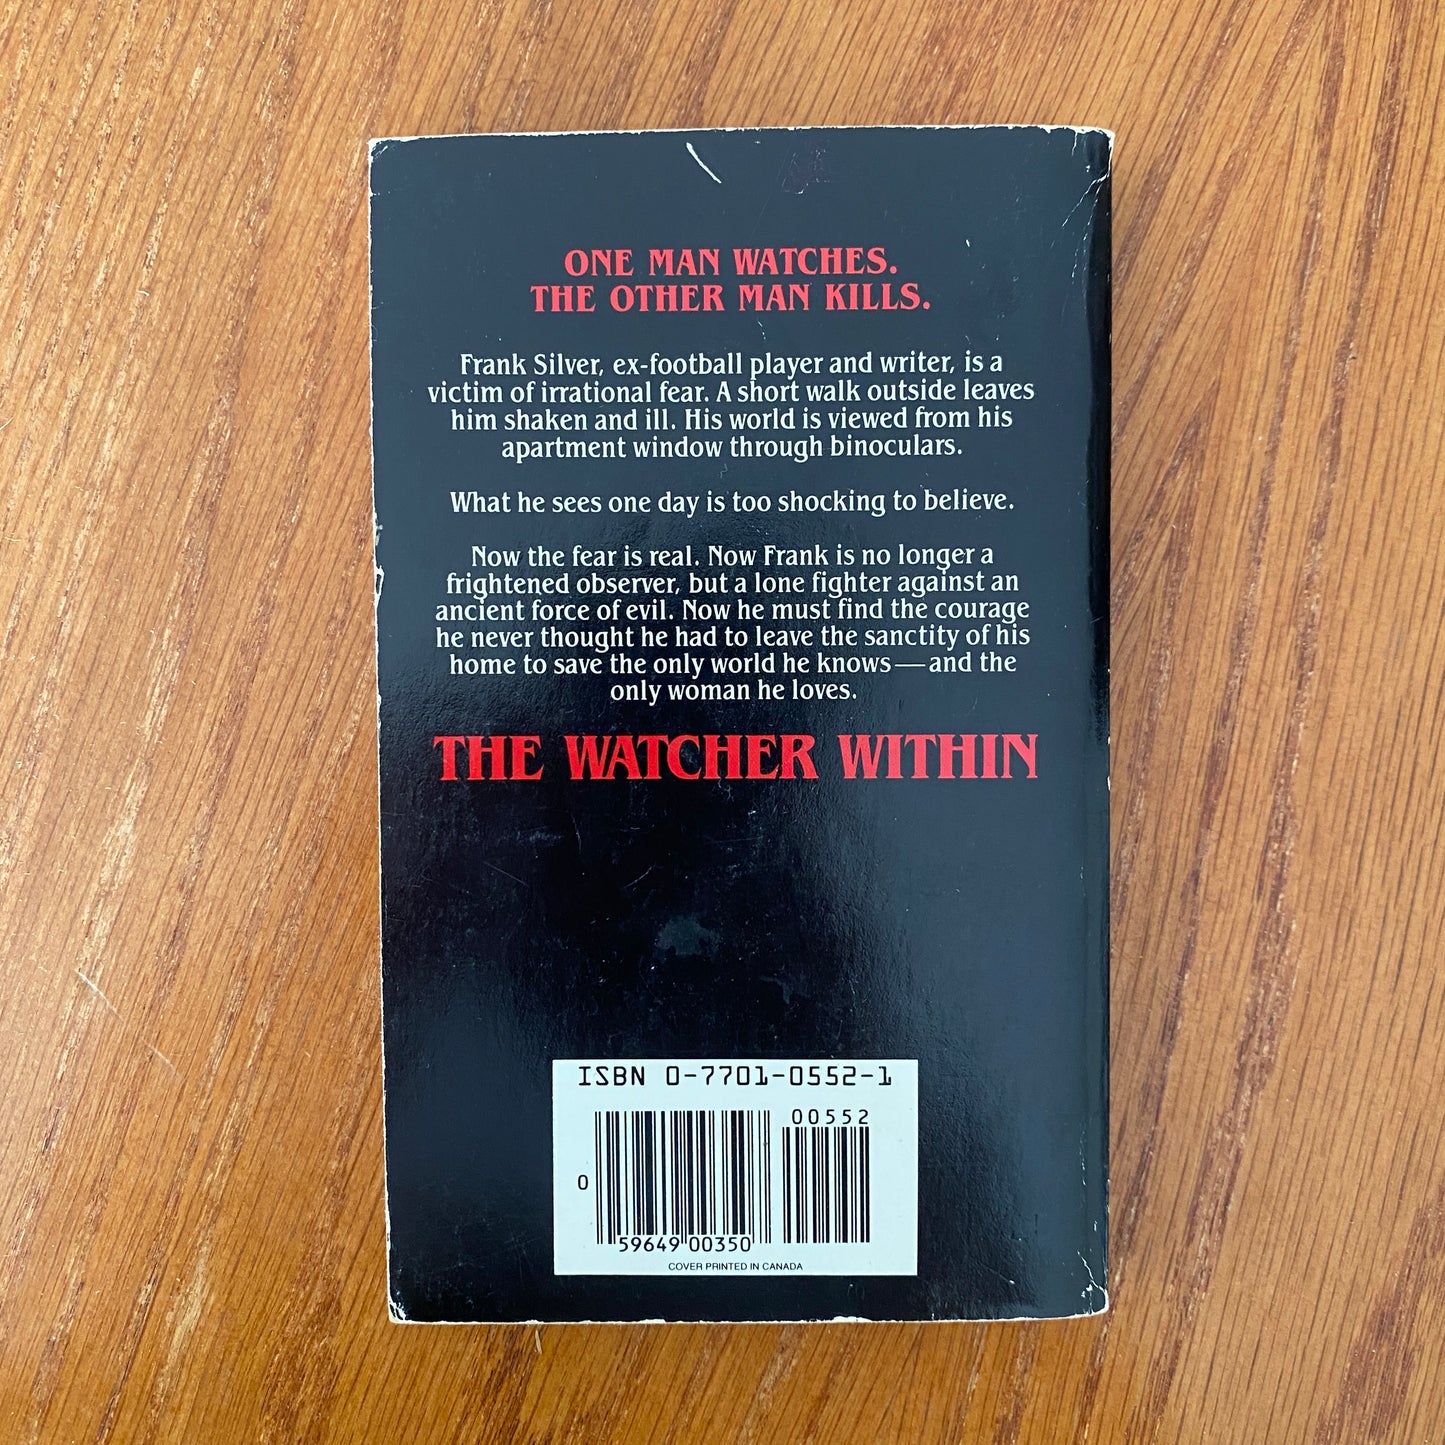 The Watcher Within - William Appel